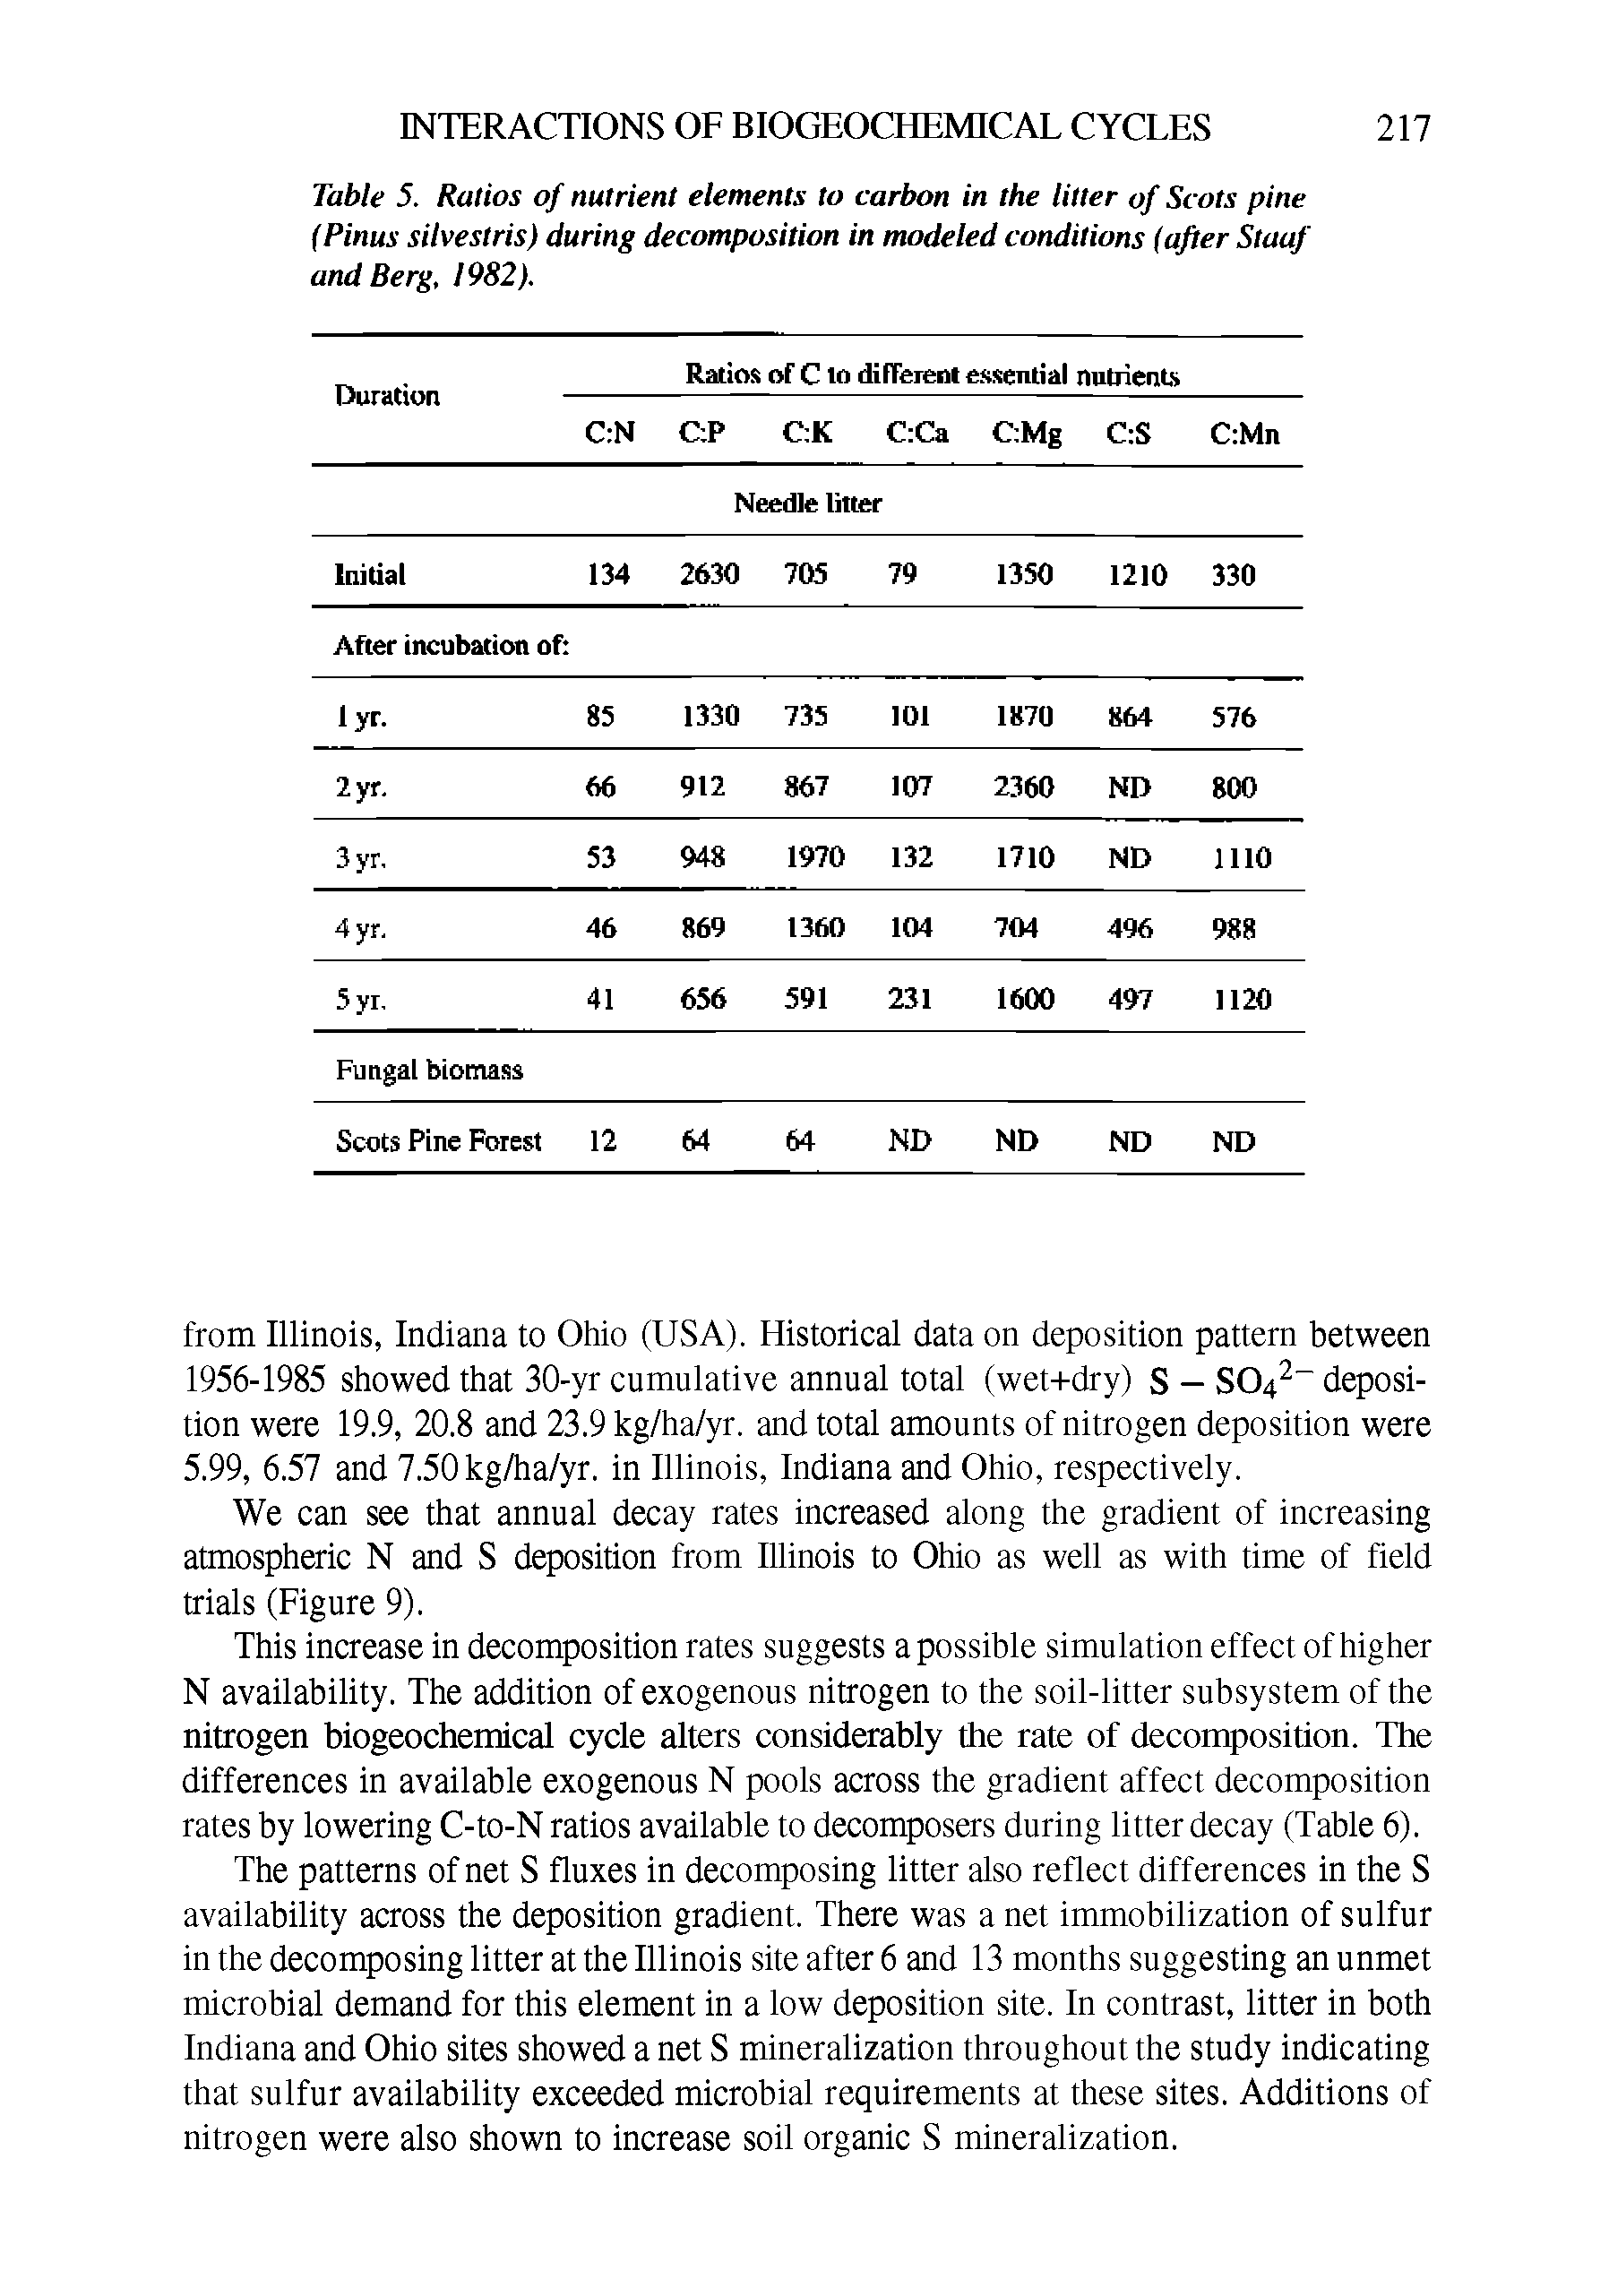 Table 5. Ratios of nutrient elements to carbon in the litter of Scots pine (Pinus silvestris) during decomposition in modeled conditions (after Staaf and Berg, 1982).